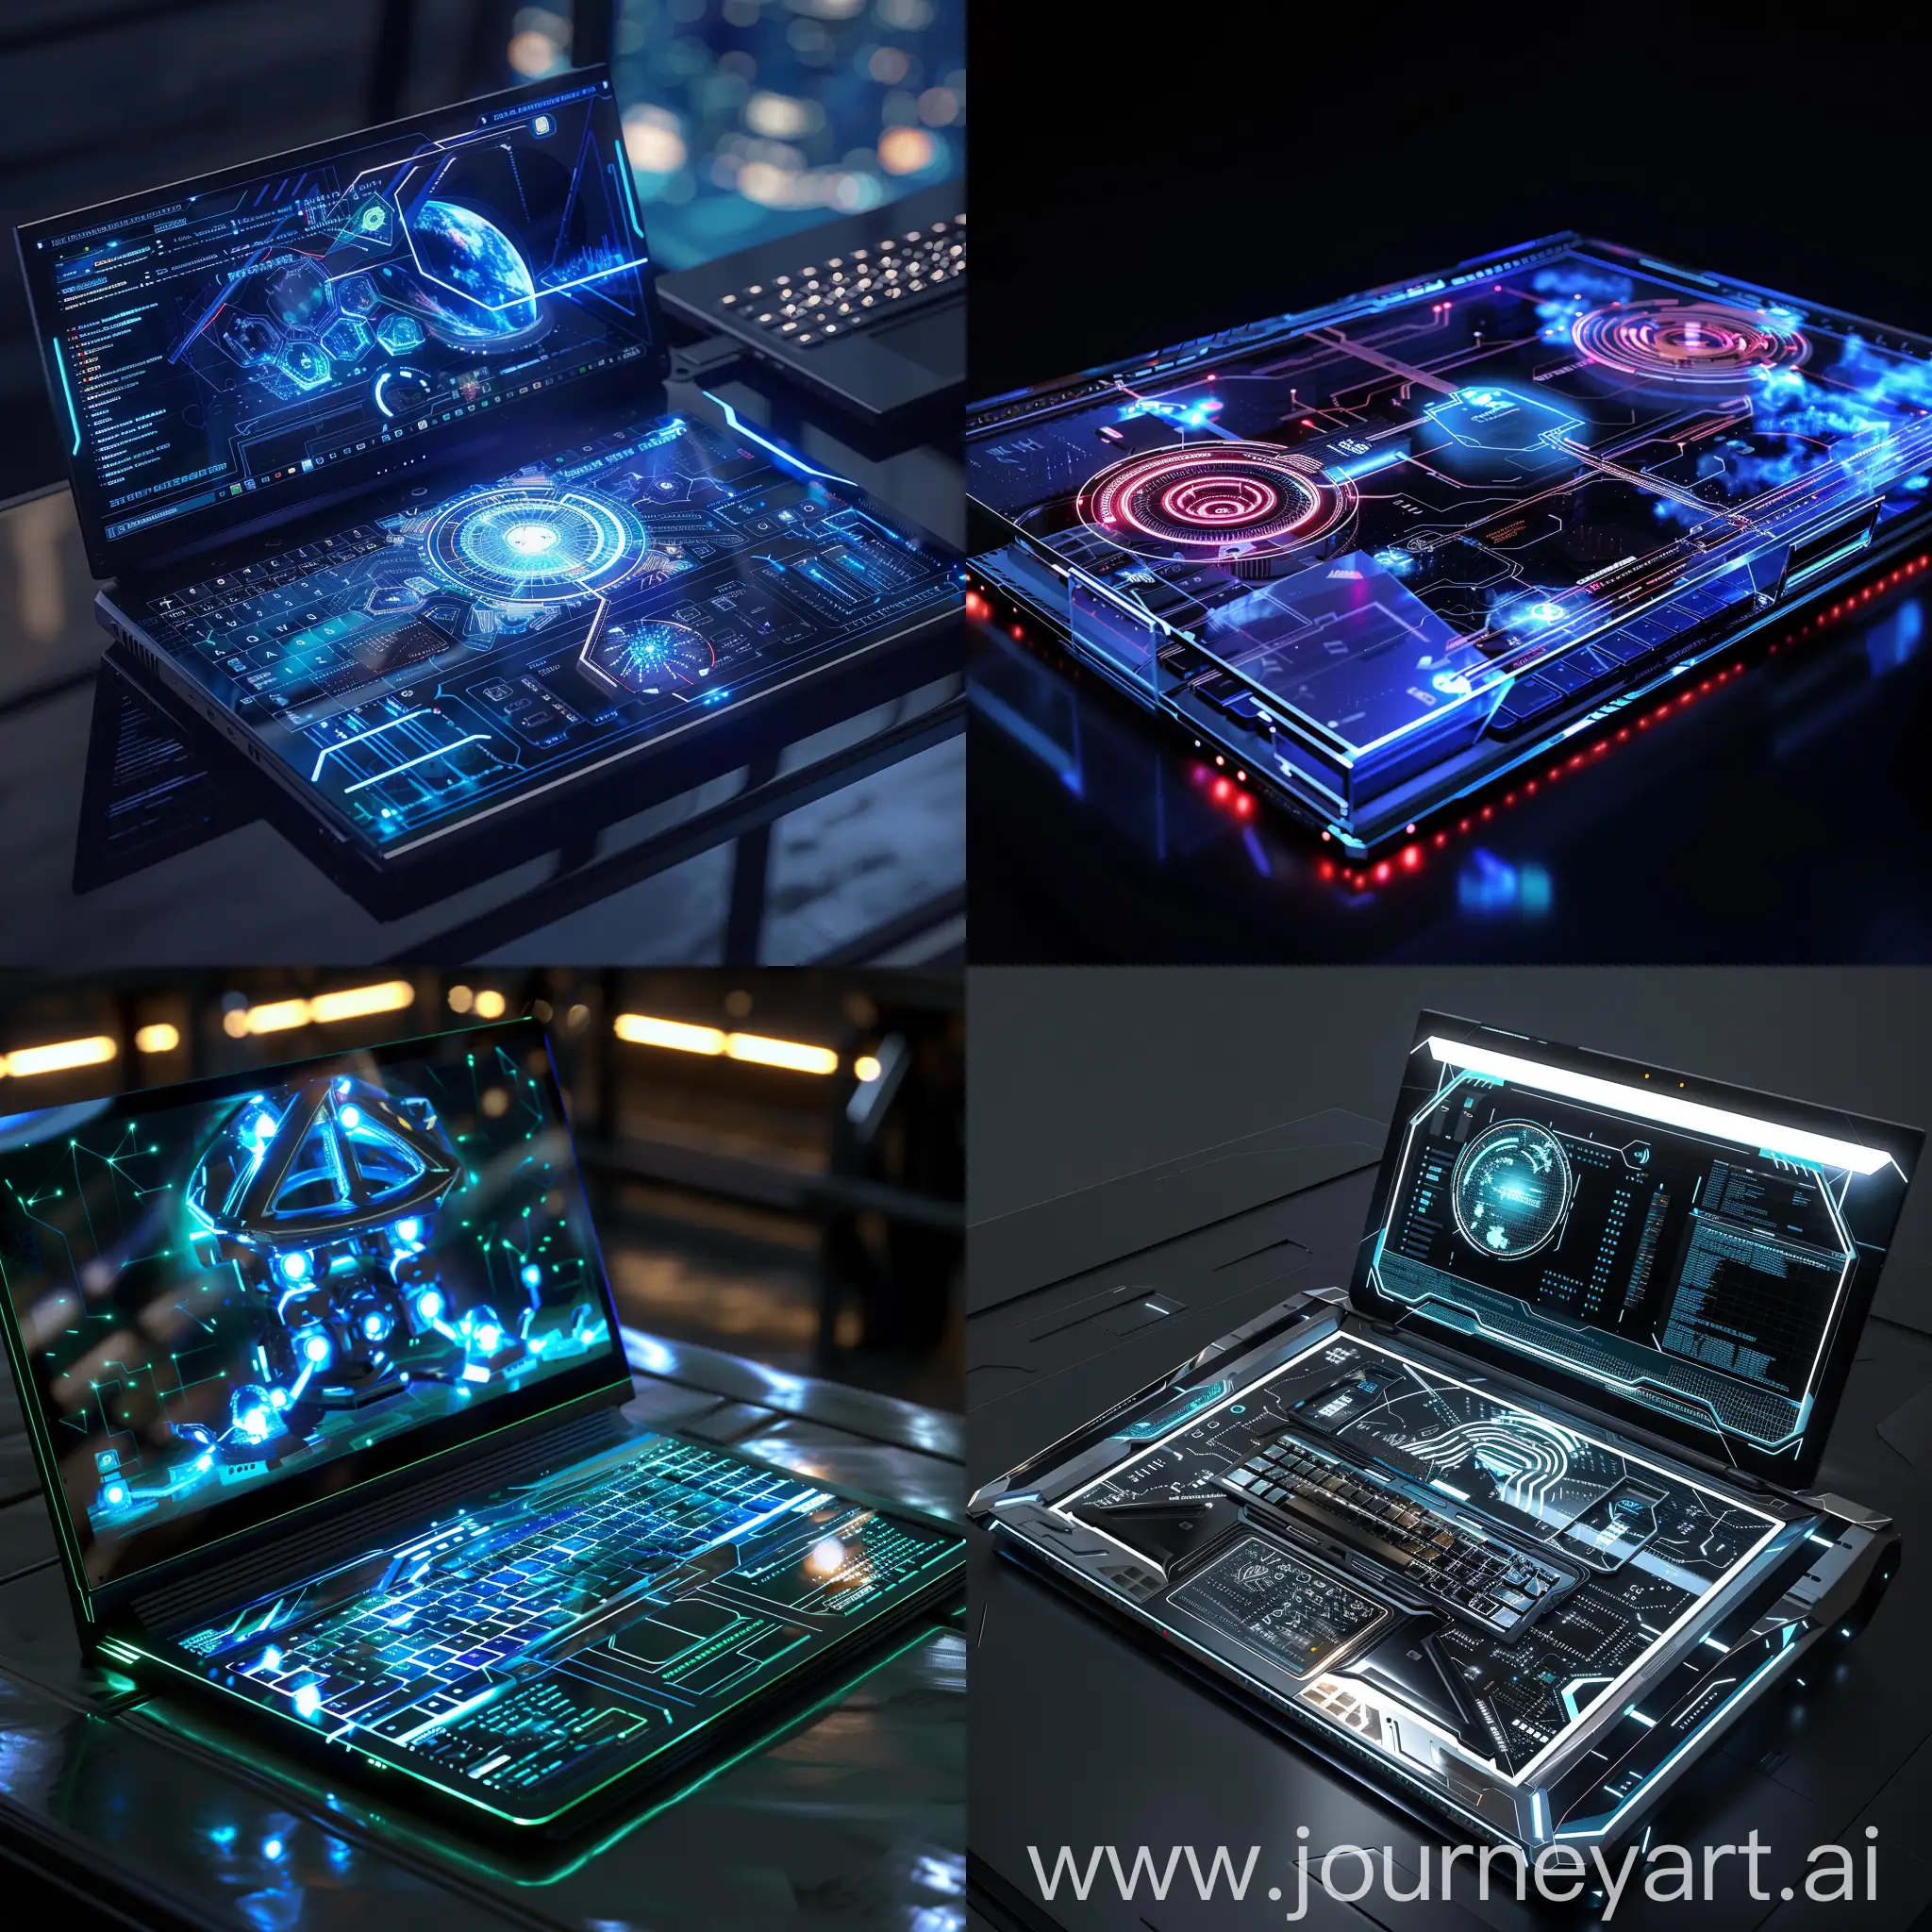 Advanced-SciFi-Laptop-with-Molecular-Memory-Storage-and-Holographic-Display